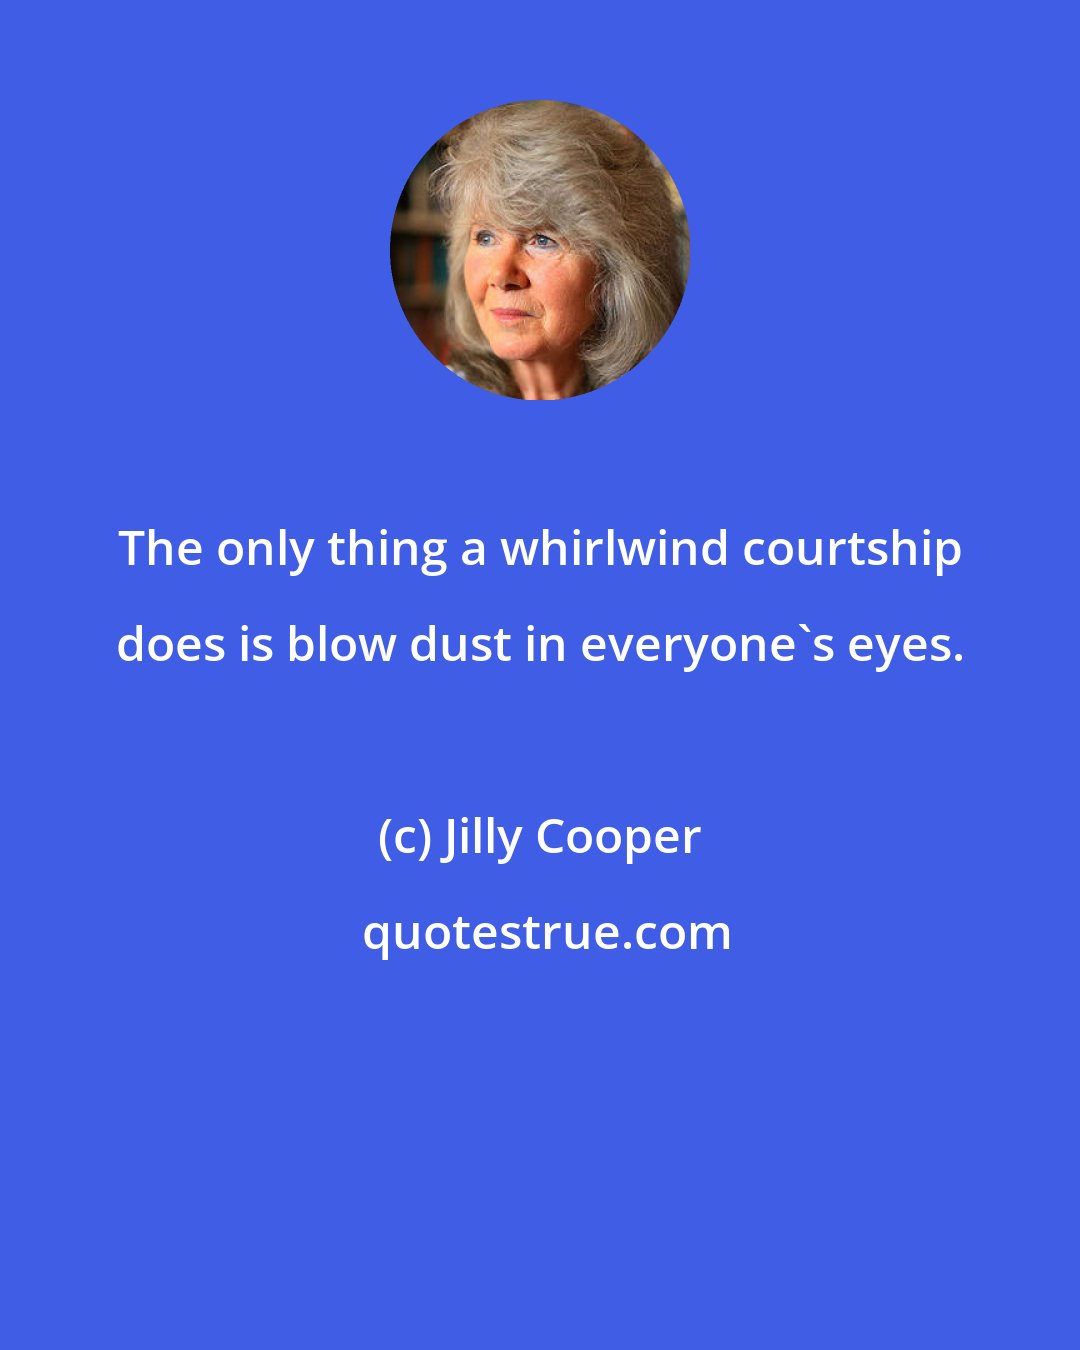 Jilly Cooper: The only thing a whirlwind courtship does is blow dust in everyone's eyes.